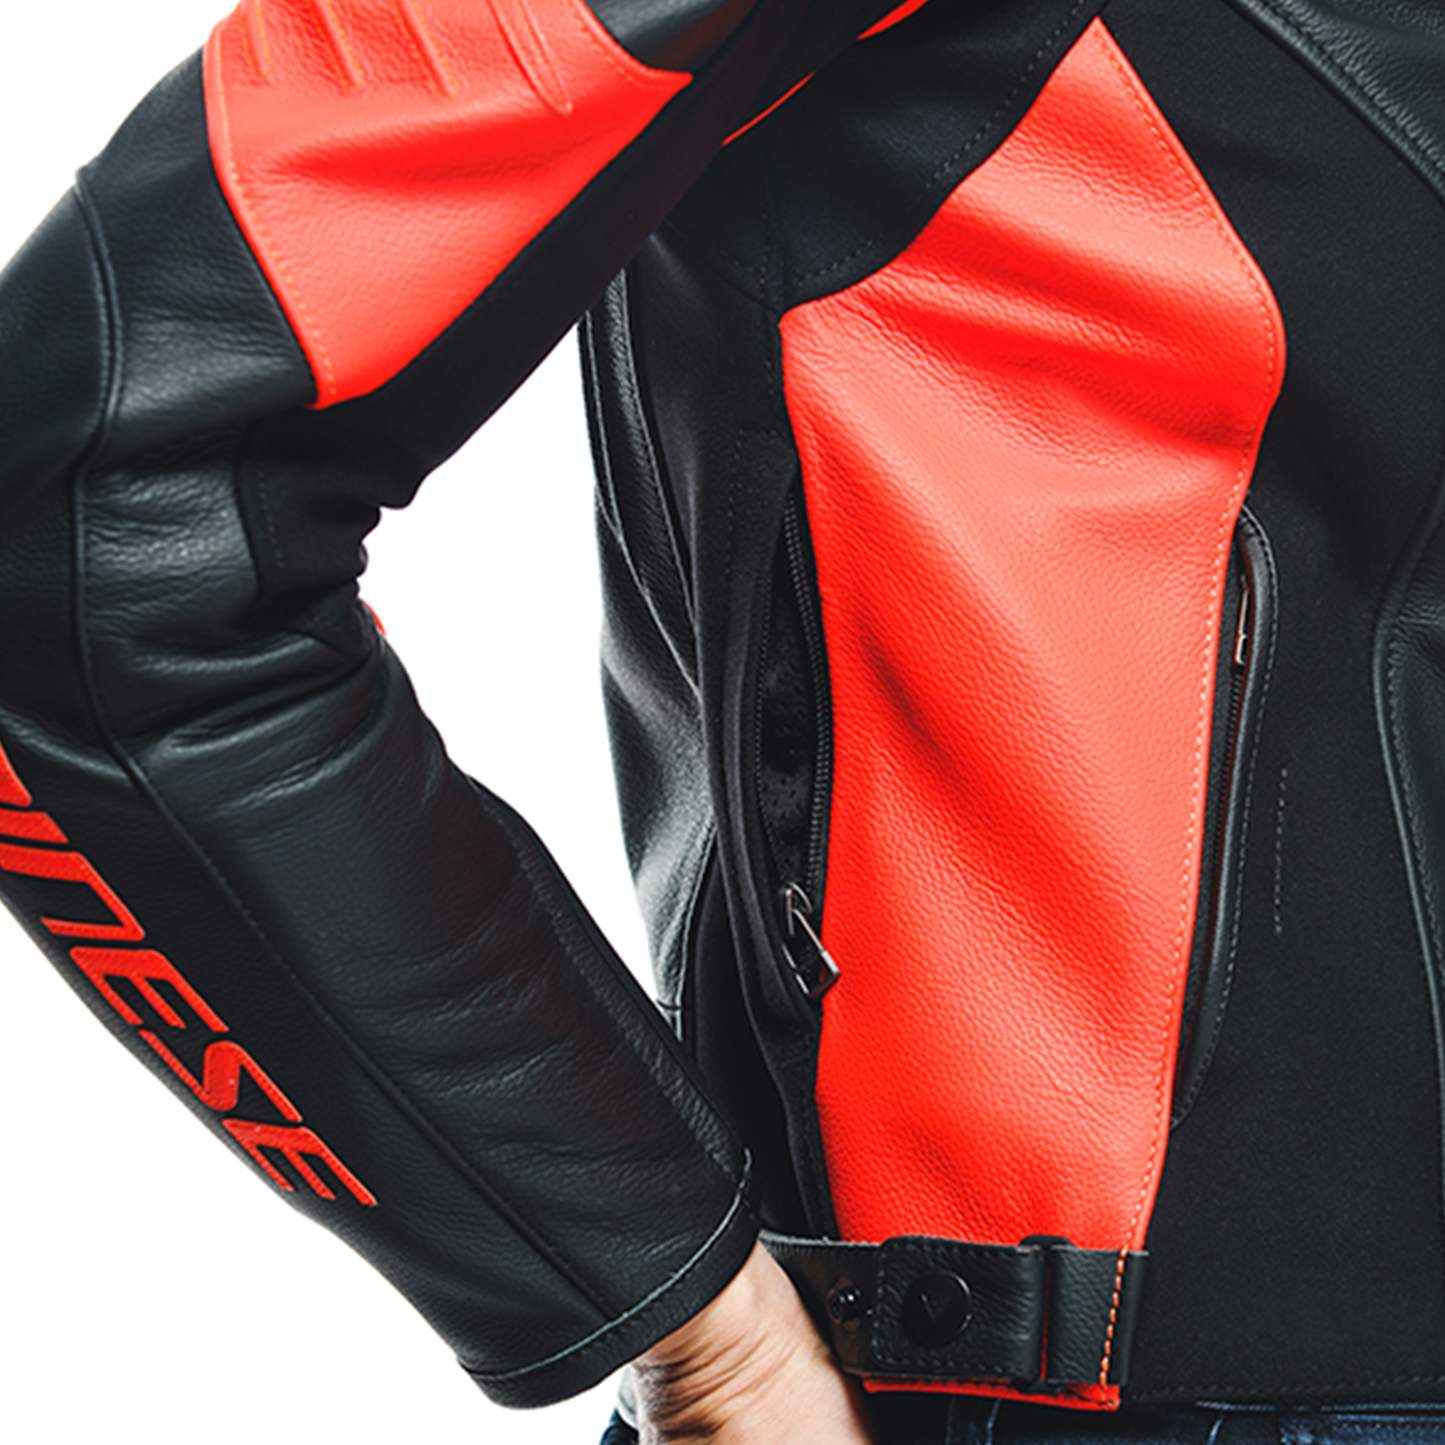 Dainese Racing 4 Lady Leather Jacket - Black/Flo Red (628)